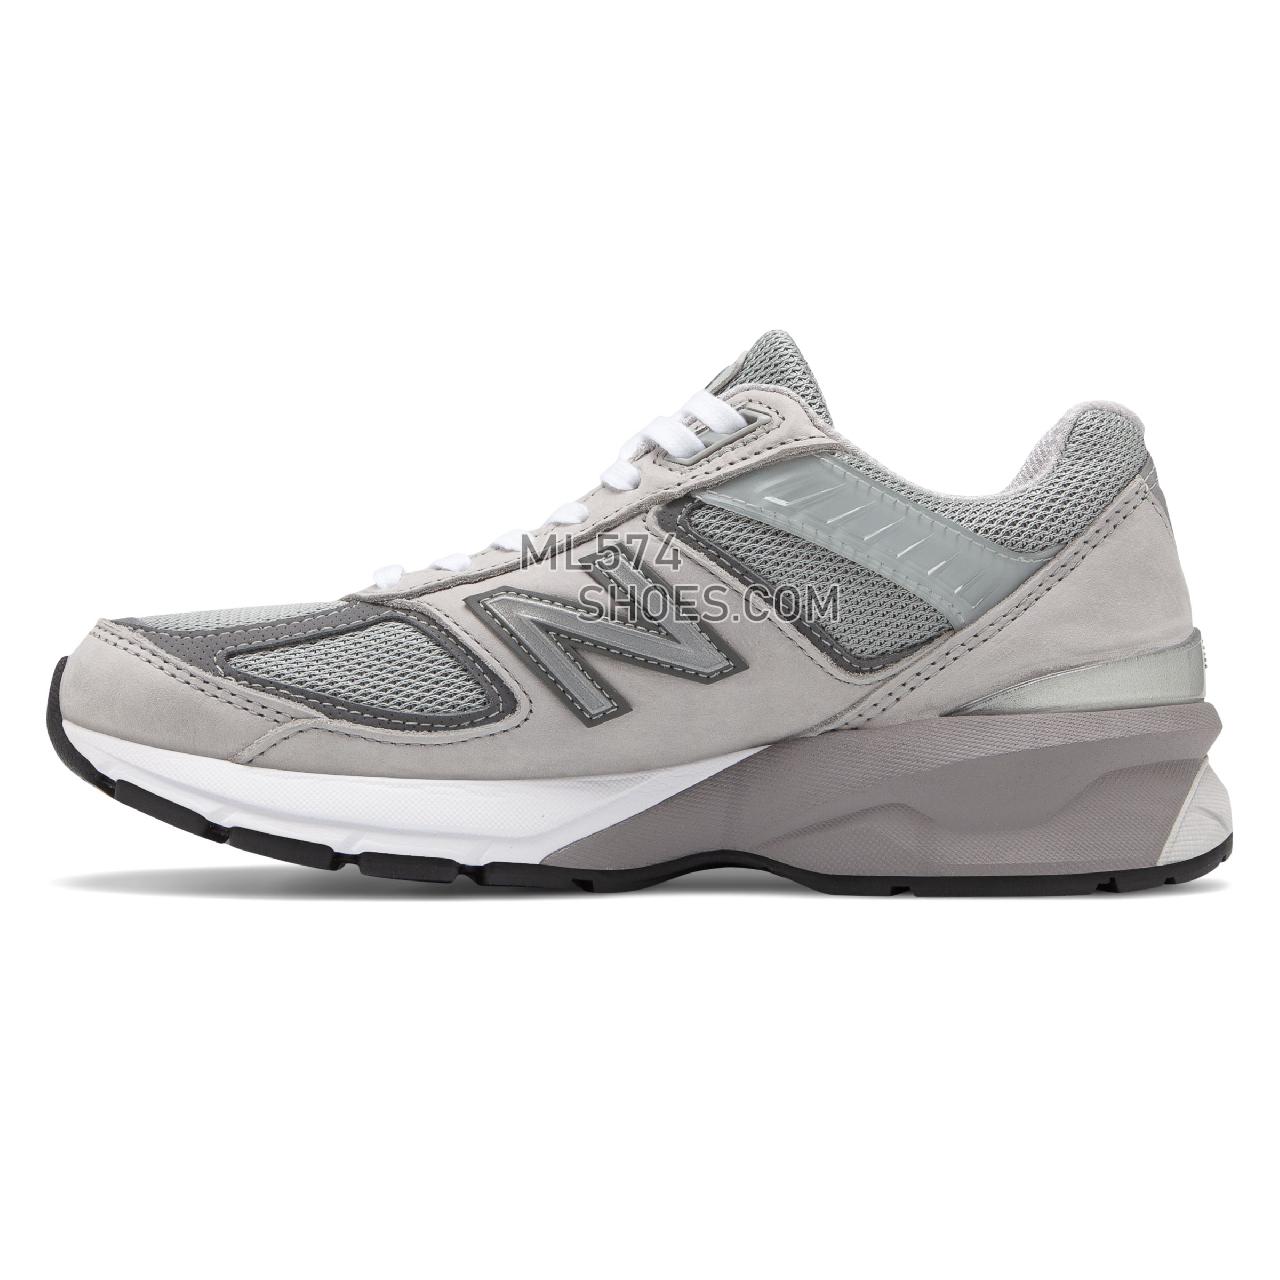 New Balance Made in US 990v5 with Nubuck - Men's Made in US 990v5 with Nubuck - Grey with Castlerock - W990IG5